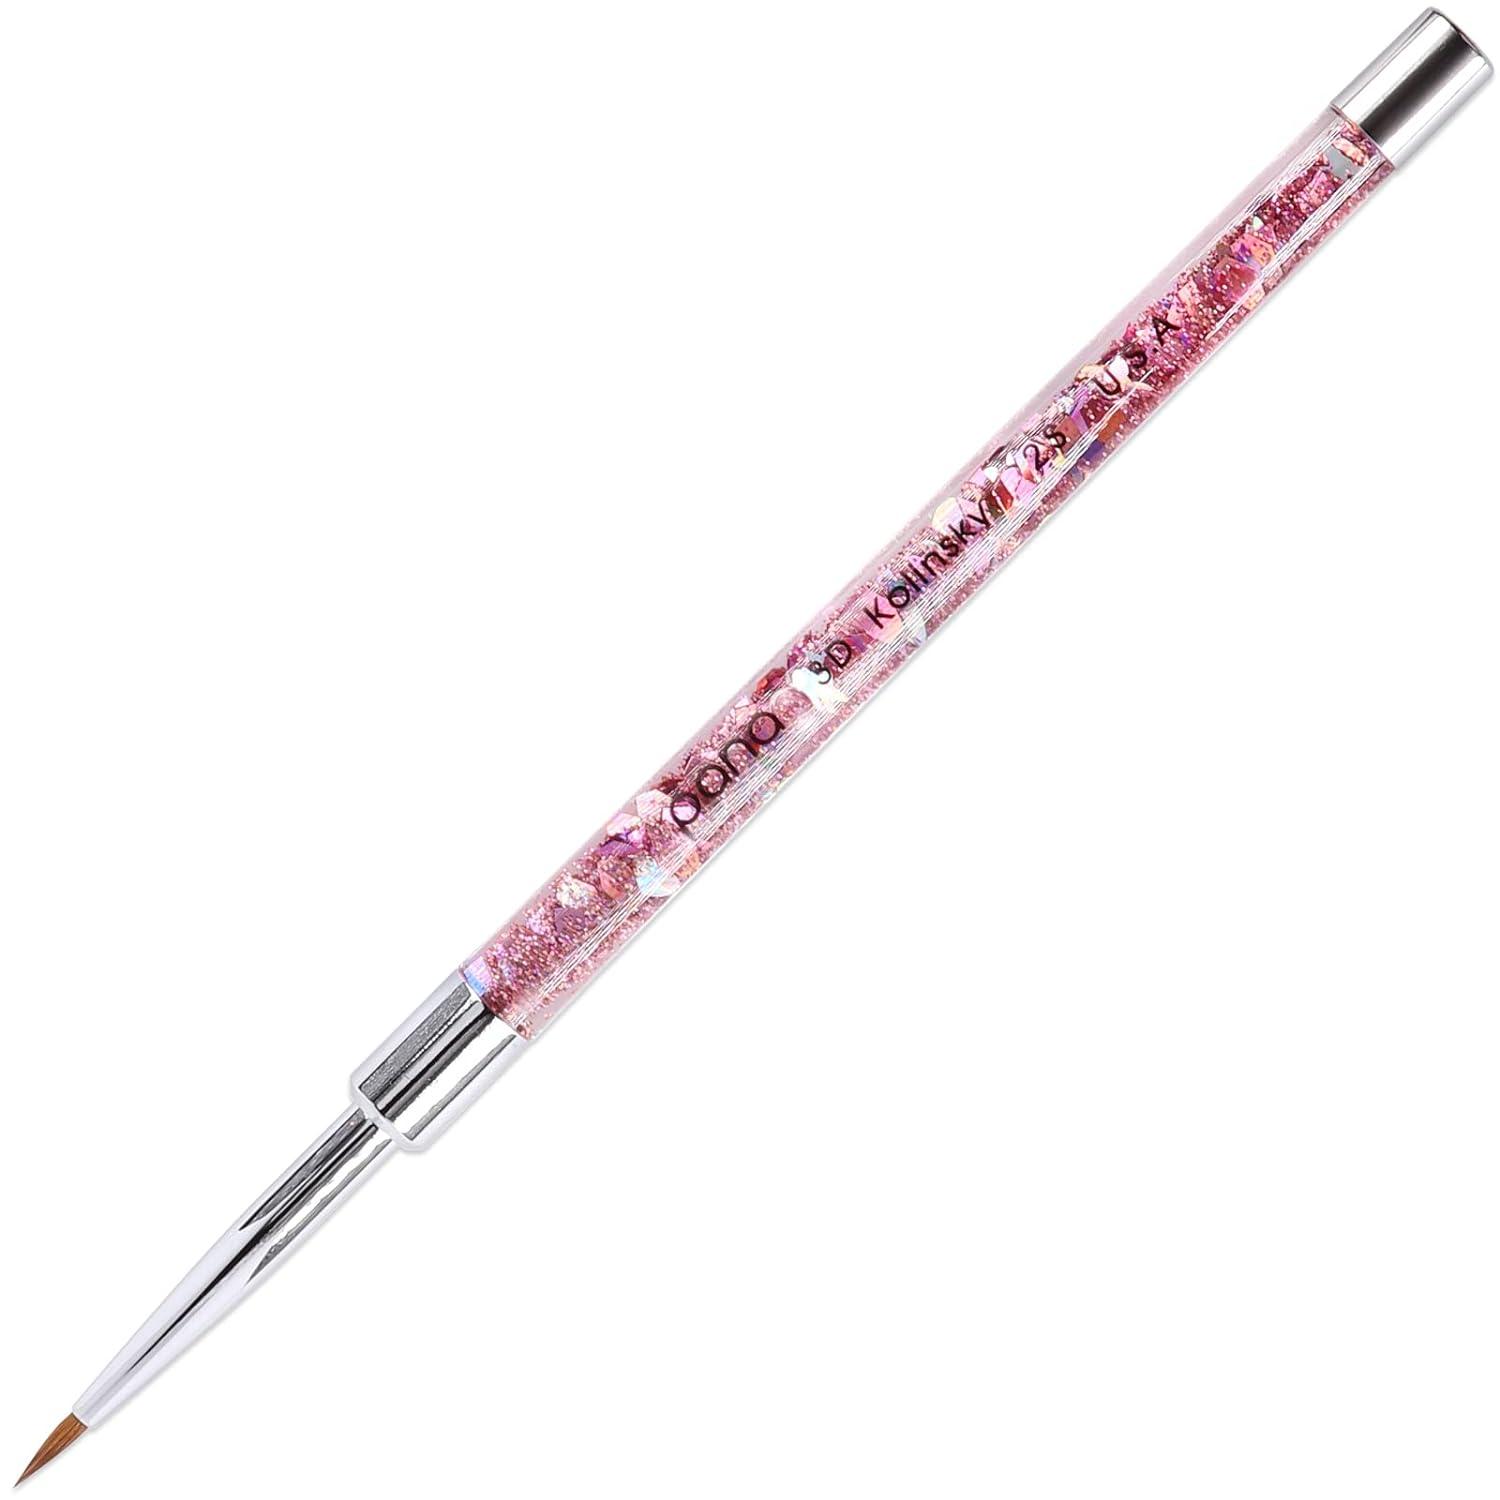 3D Sculpture Nail Art Brush with Glitter Pink Clear Acrylic Handle - Purple Phoenix Nail Supply